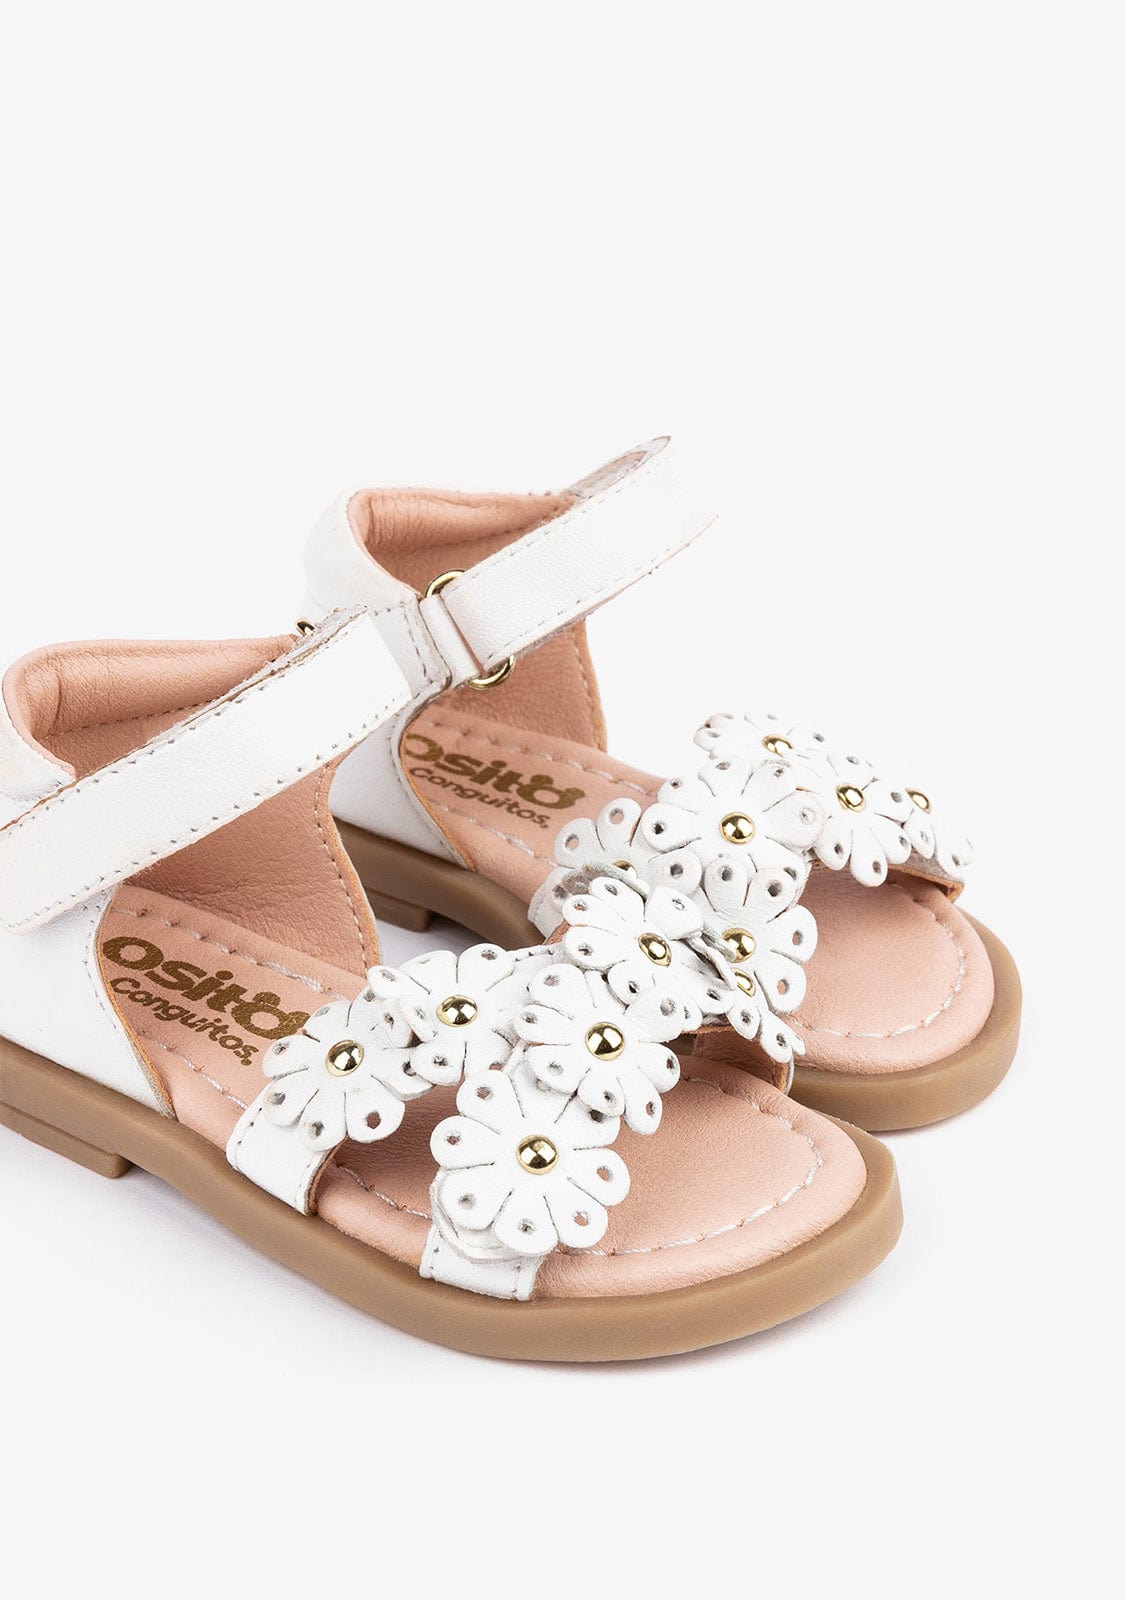 OSITO Shoes Baby's White Daisy Leather Sandals